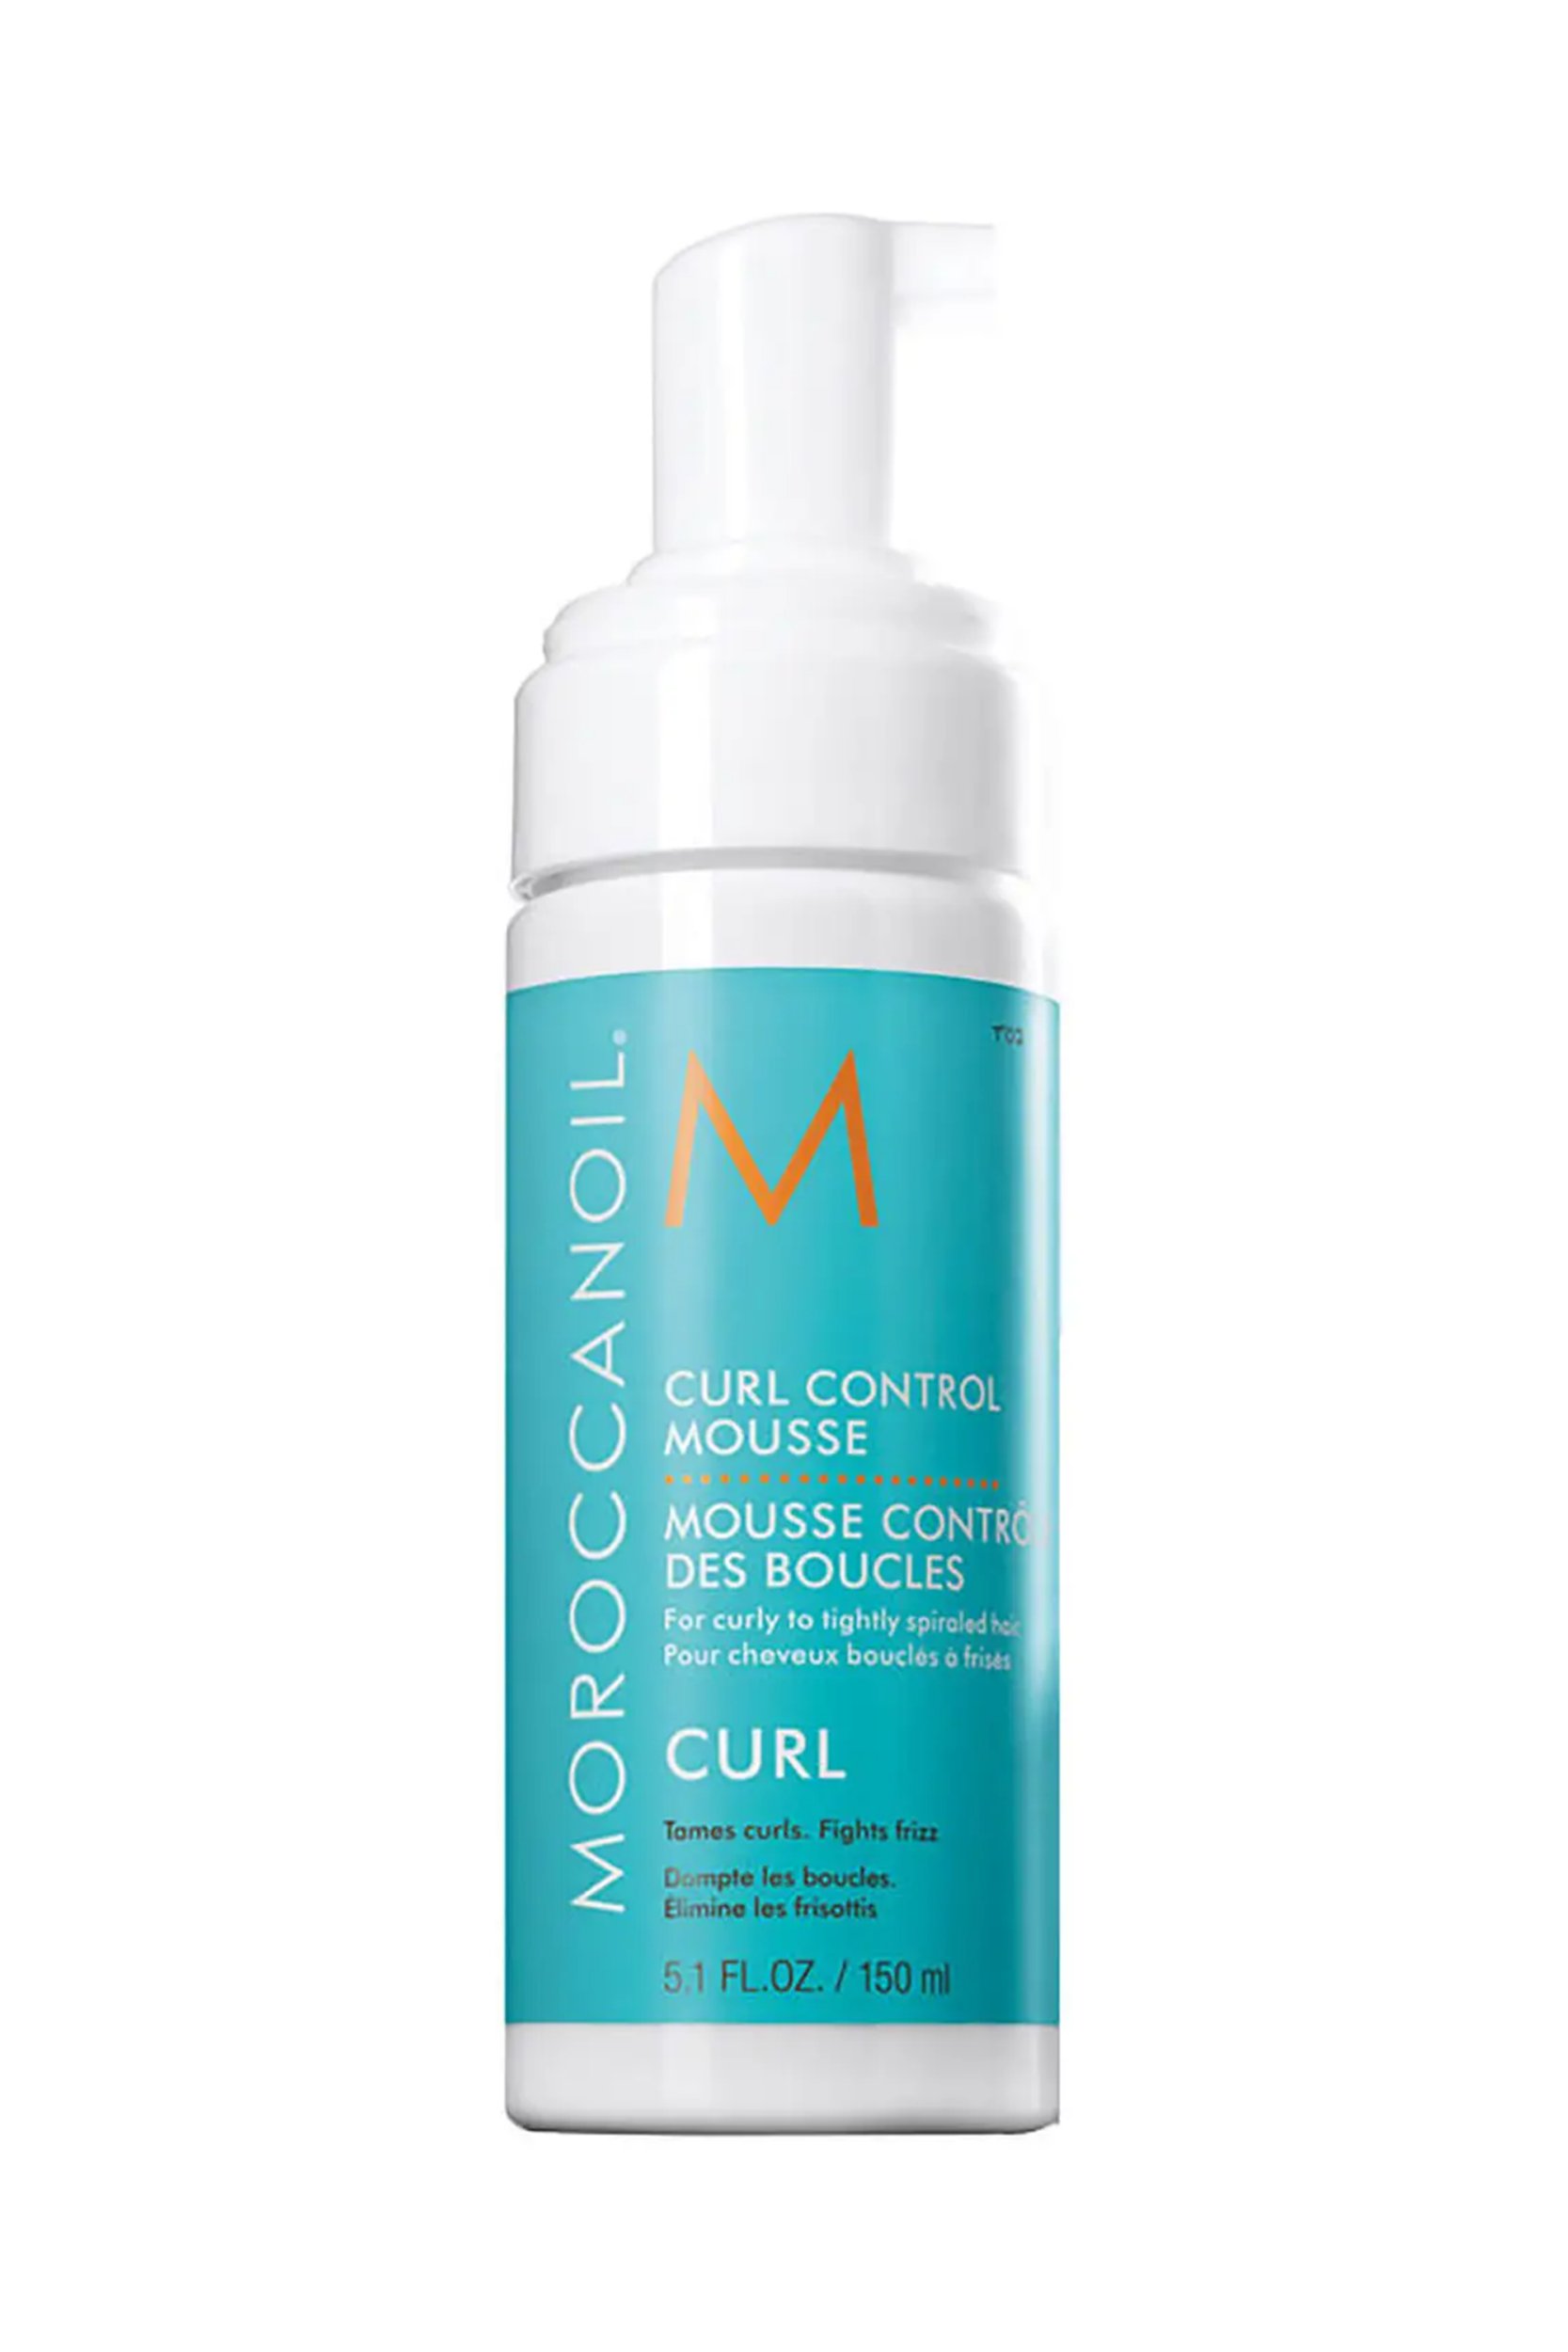 The Best Hair Mousse For Curly Hair That Won't Leave You Crunchy